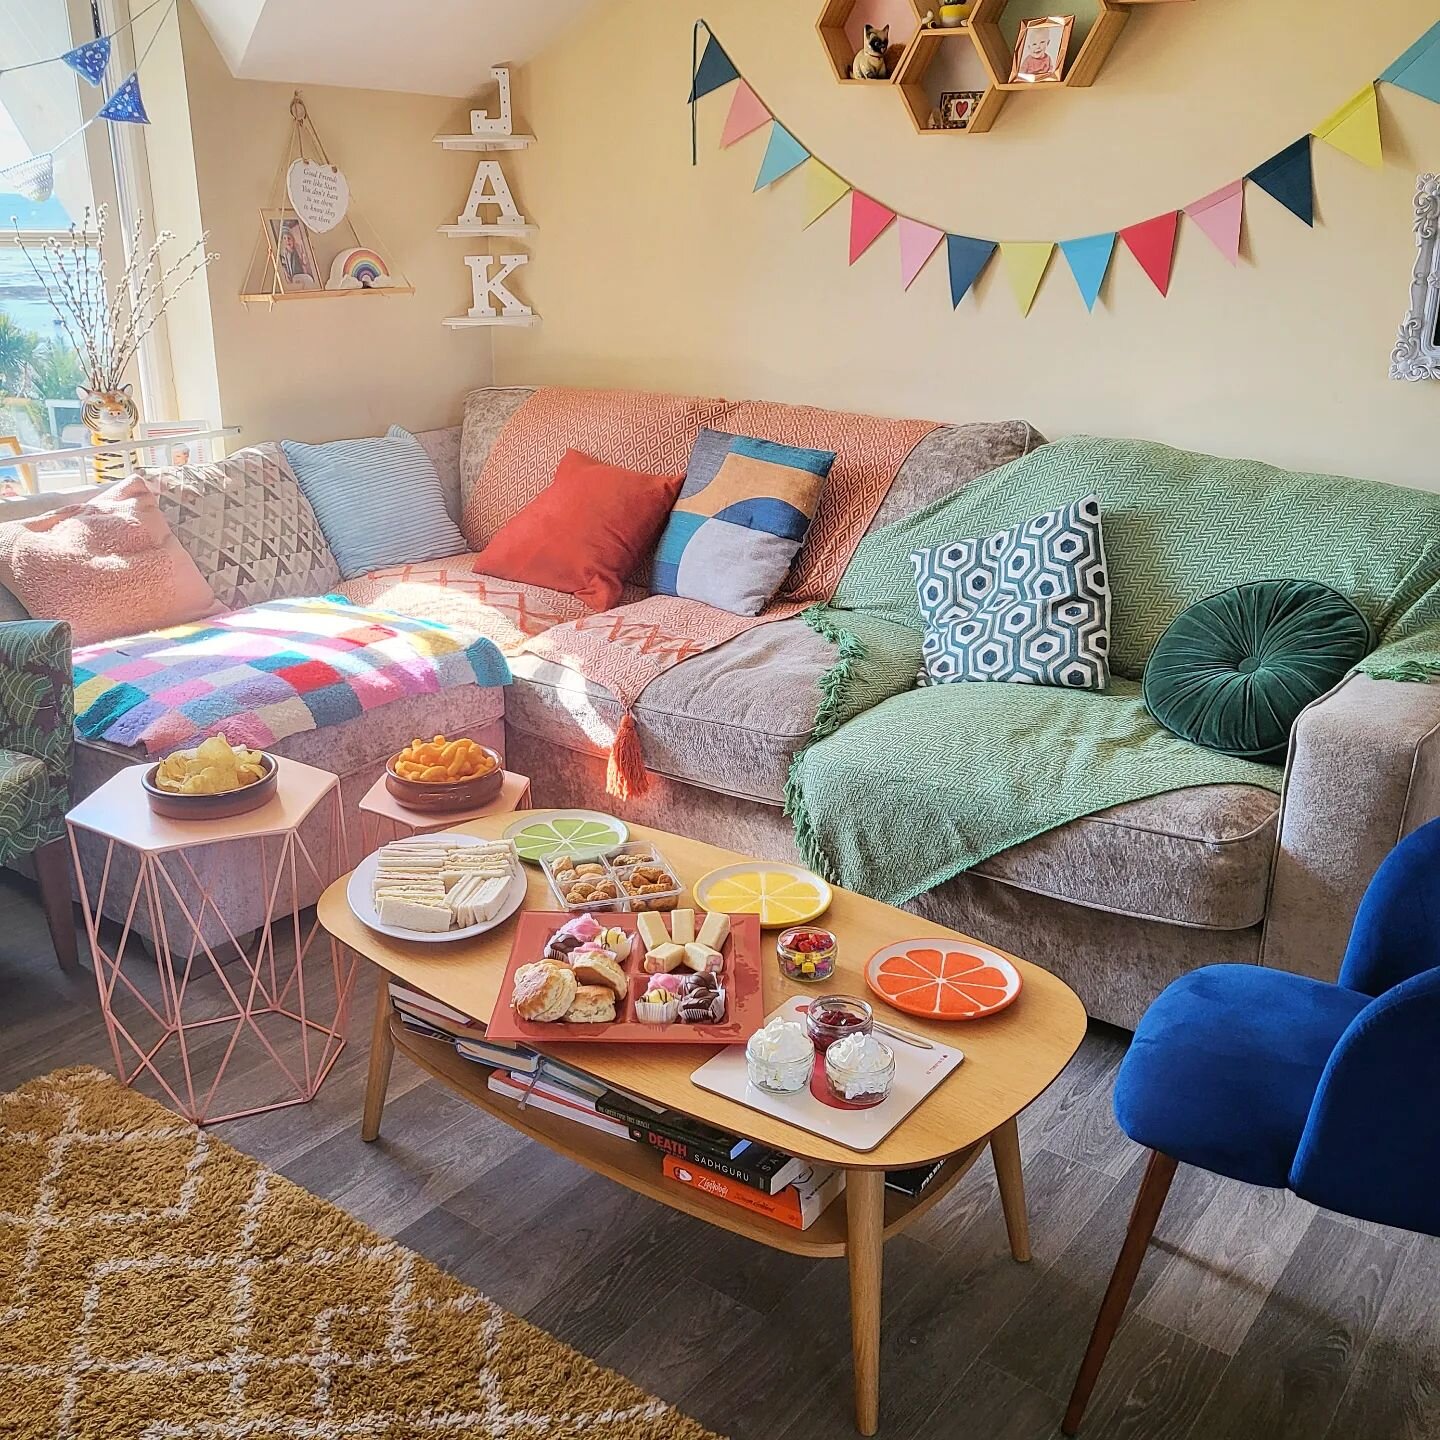 💜💚🧡💛

My home is an extension of the inside of my brain, colourful, chaotic, busy and full to the brim with 🙃
S T U F F 

I'm a self confessed bunting addict, generally having a million conversations at a million miles an hour, but I wouldn't wa